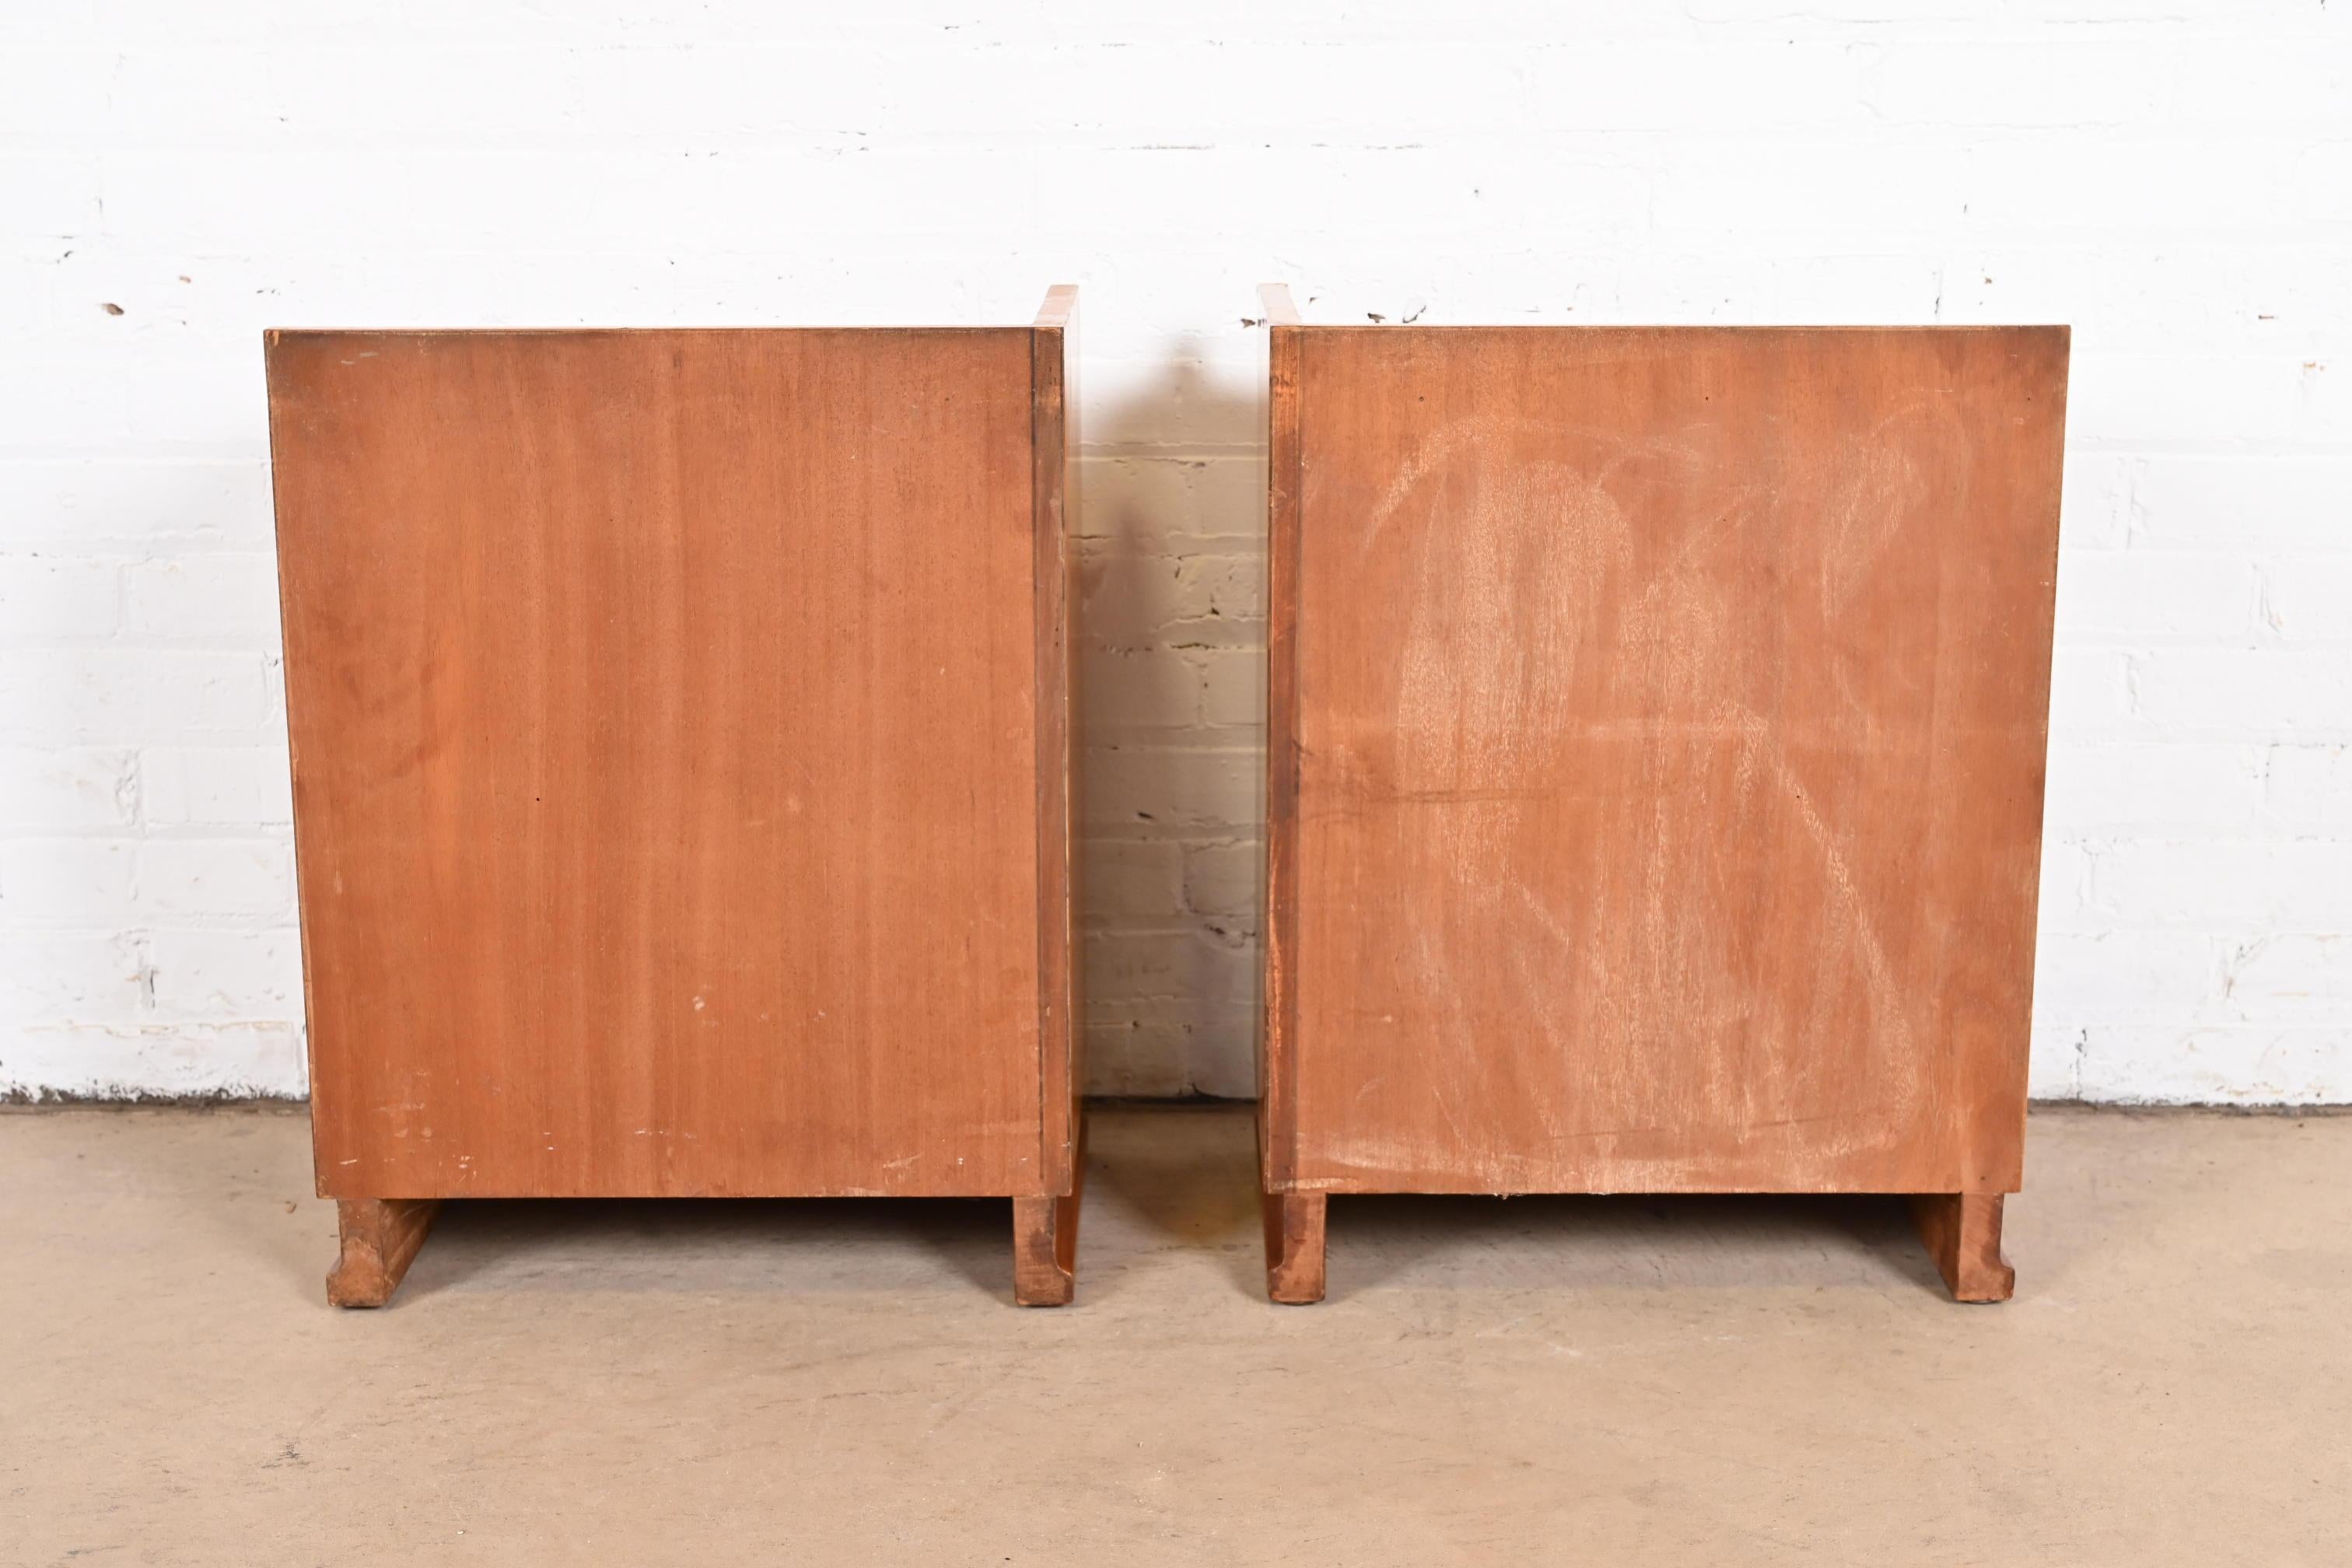 French Art Deco Burl Wood Nightstands in the Manner of Maison Dominique, 1930s For Sale 4